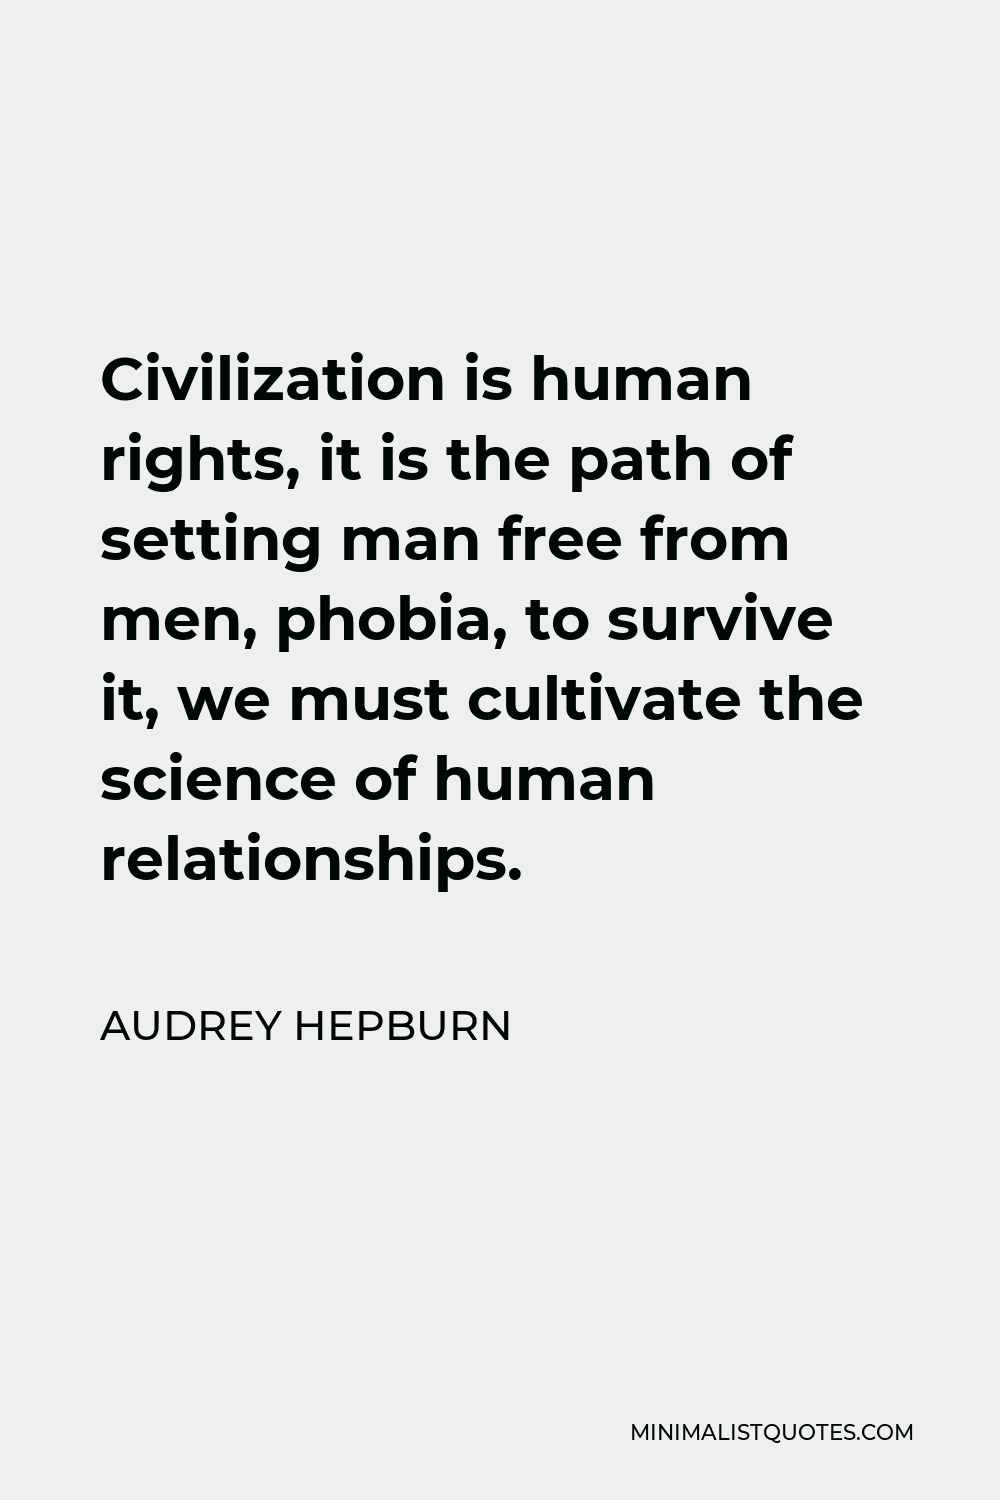 Audrey Hepburn Quote - Civilization is human rights, it is the path of setting man free from men, phobia, to survive it, we must cultivate the science of human relationships.